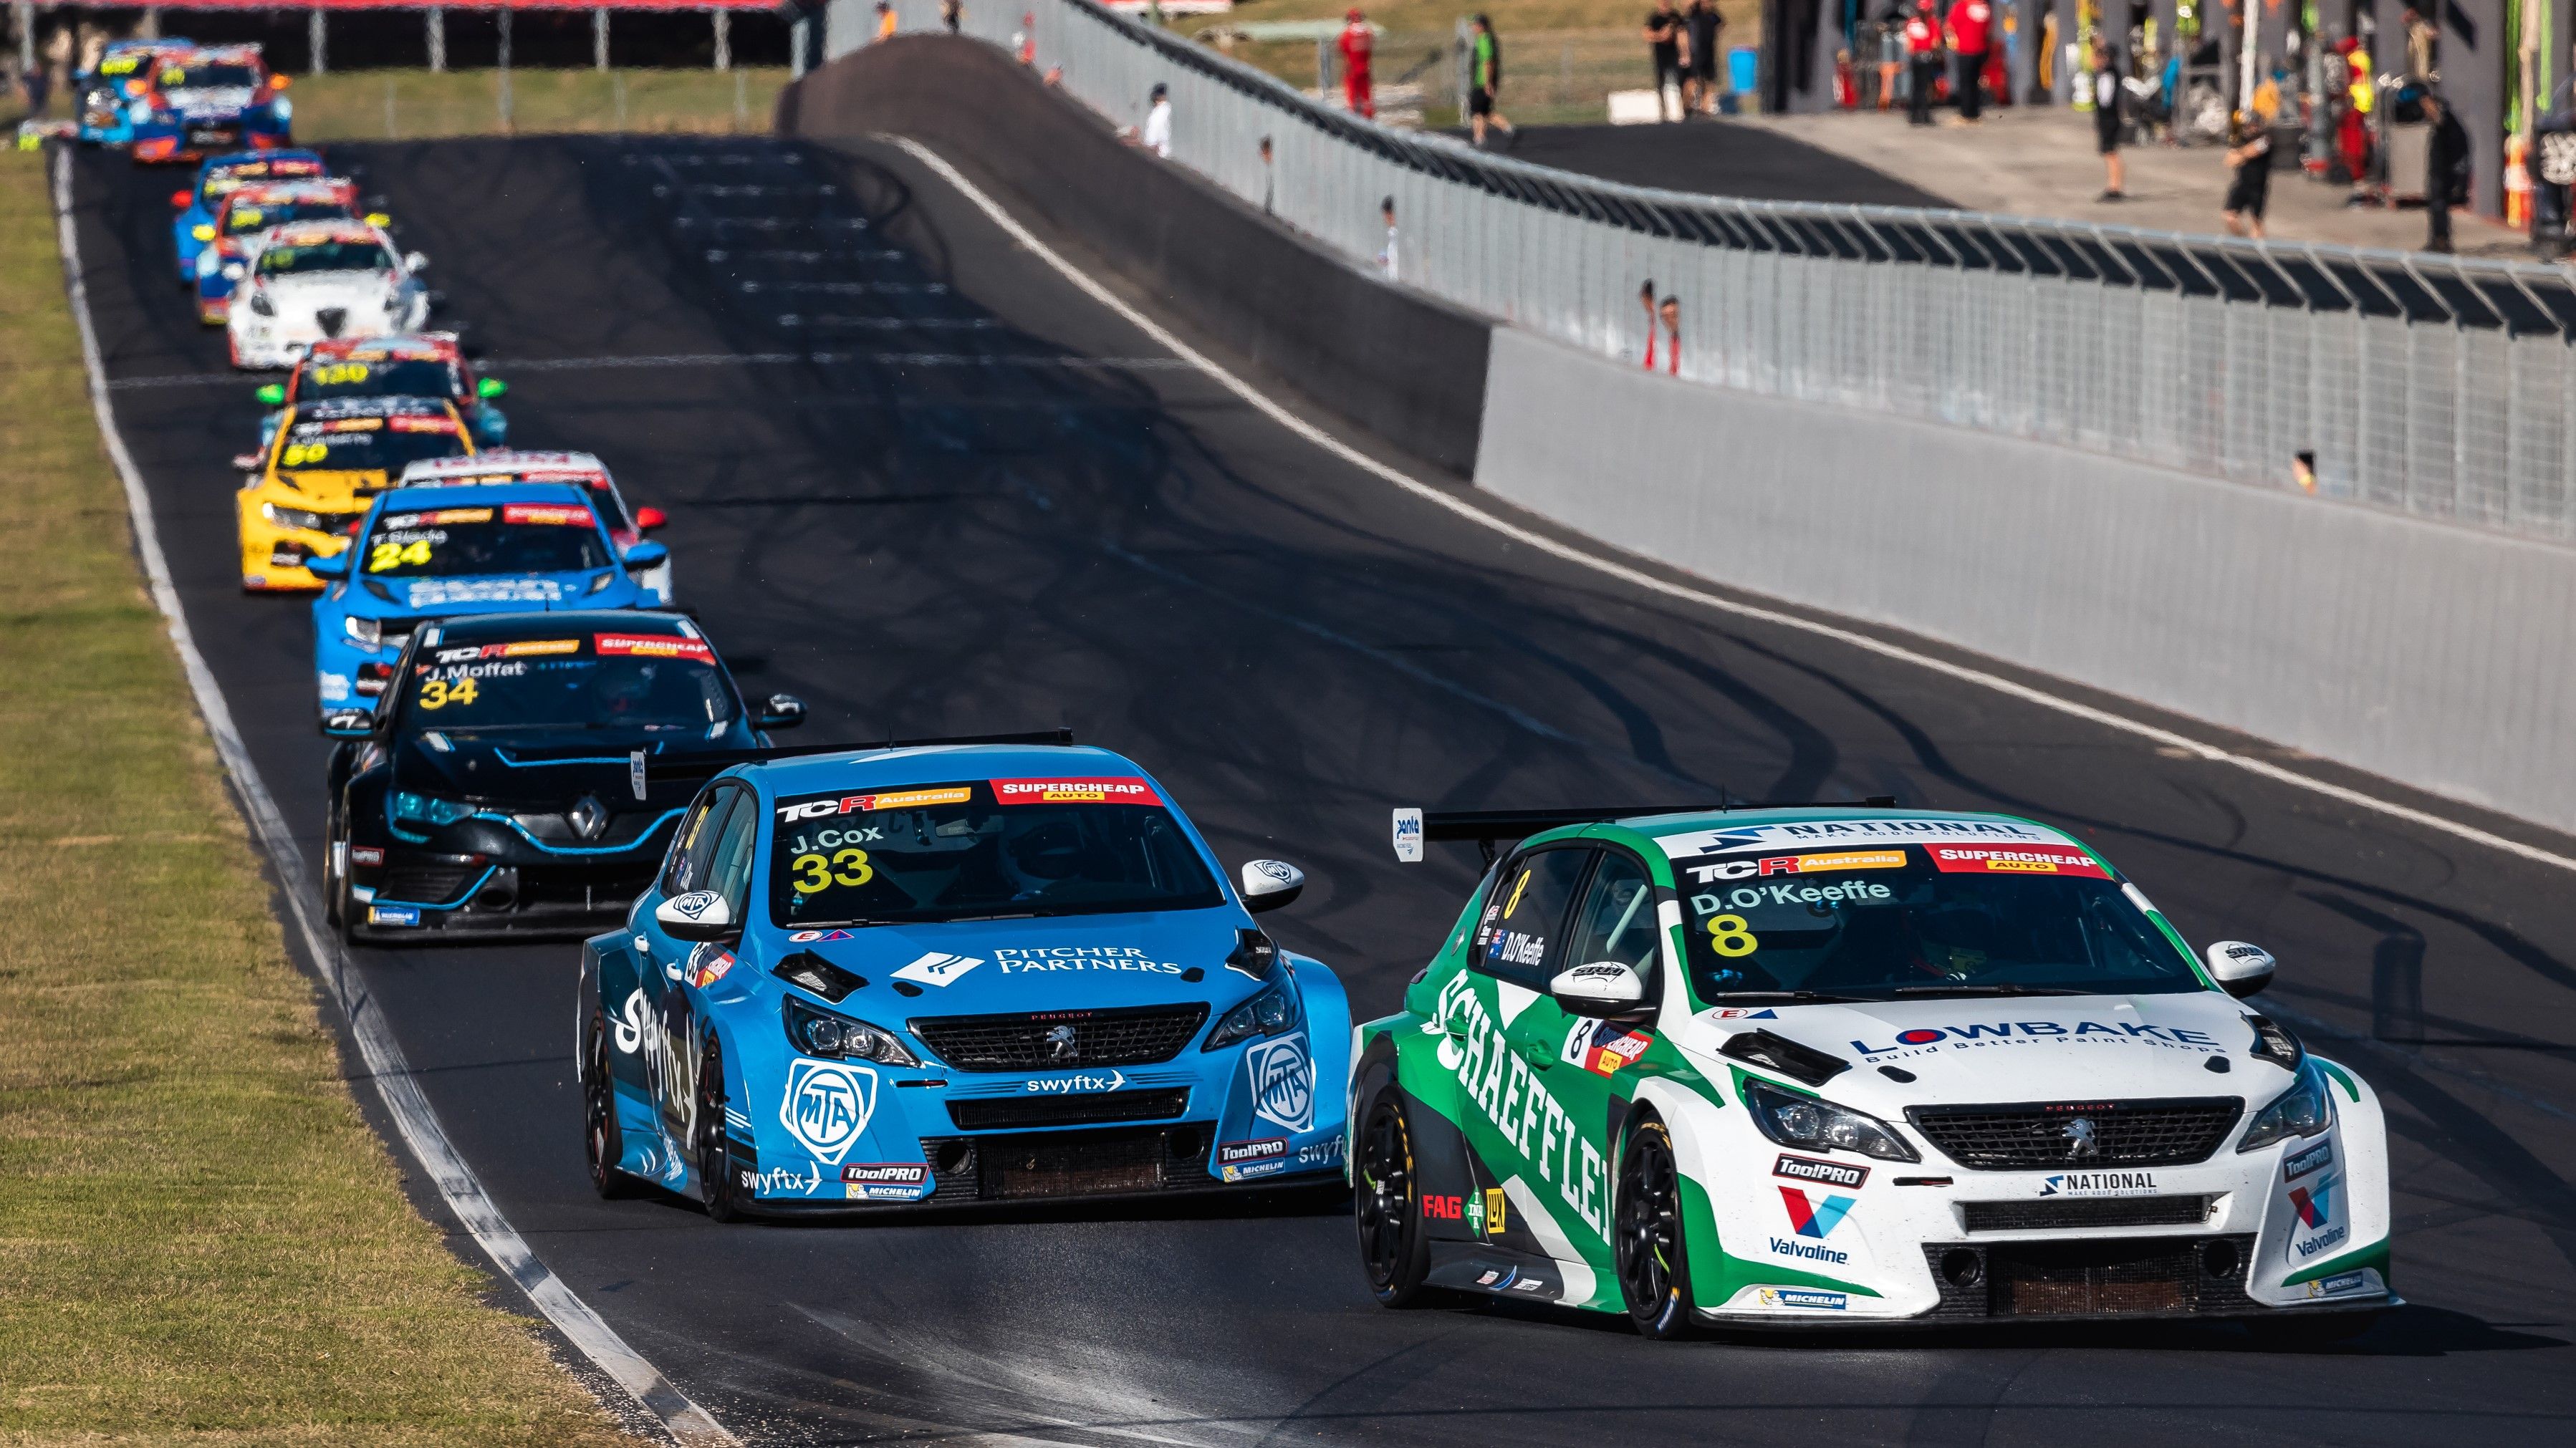 The Garry Rogers Motorsport-led Peugeot fleet were the quickest at Mount Panorama earlier this year.